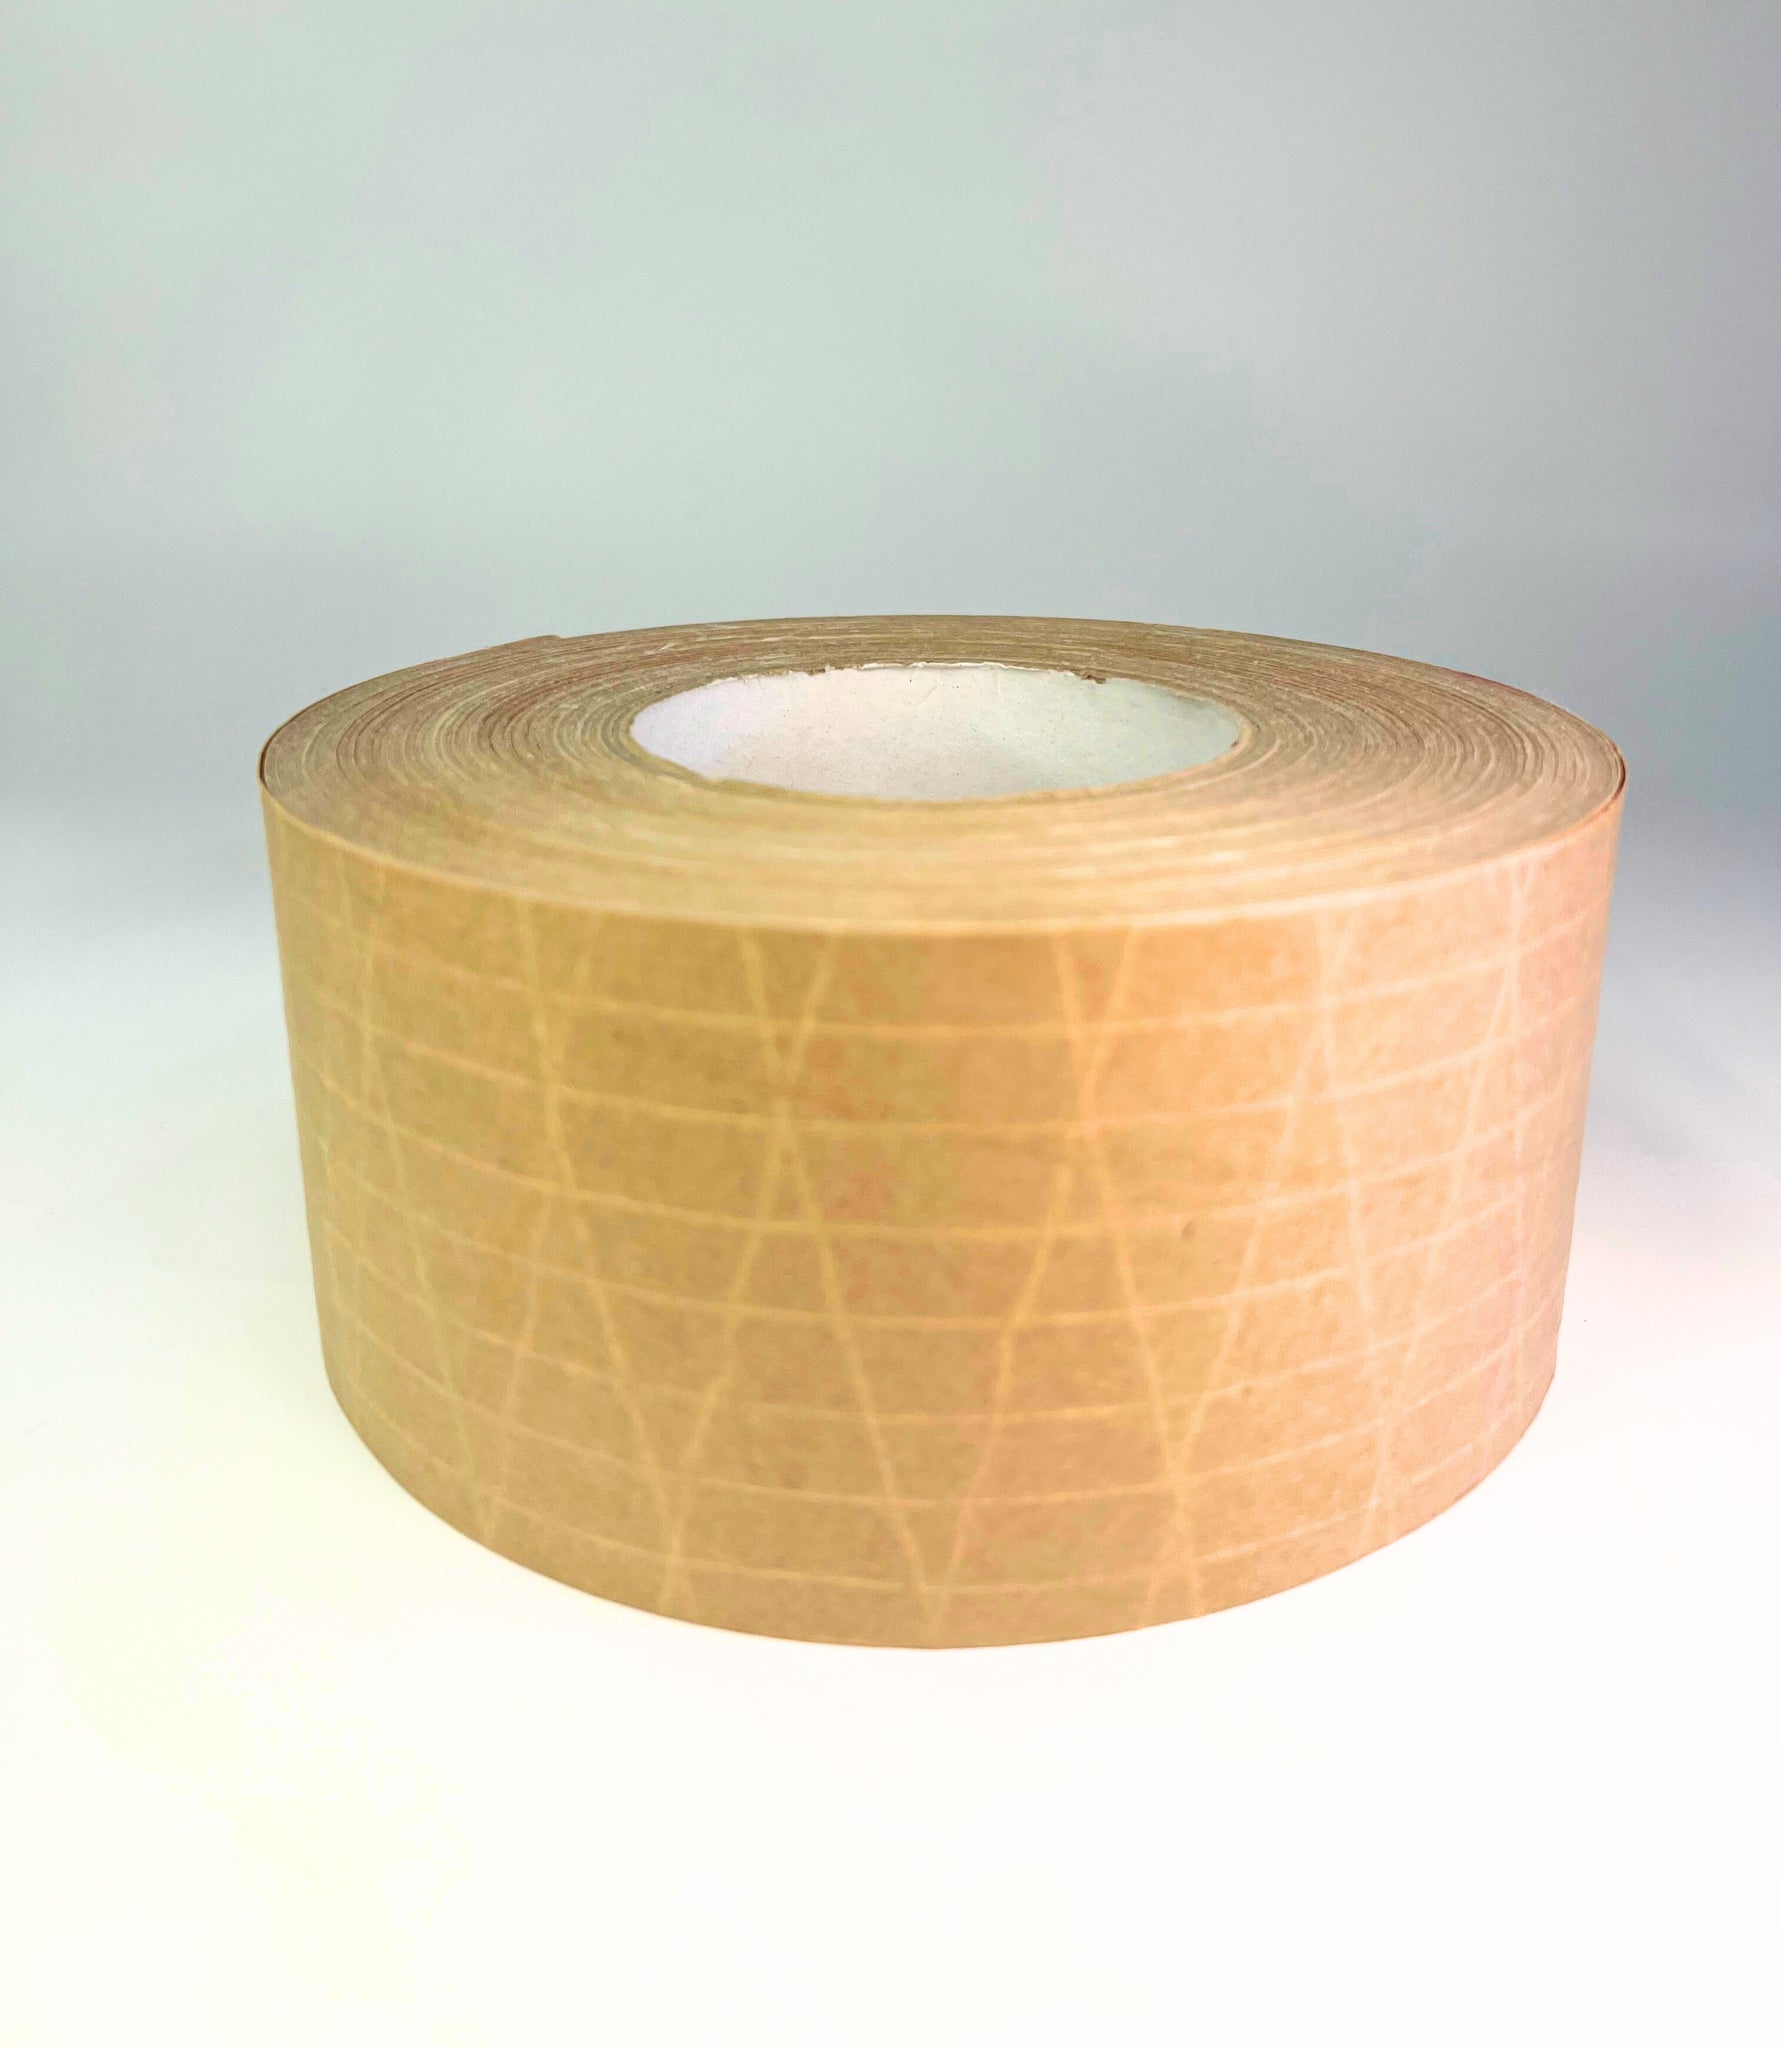 BROWN TAPE WATER ACTIVATED ECO-FRIENDLY TAPE FOR GIFT WRAPPING